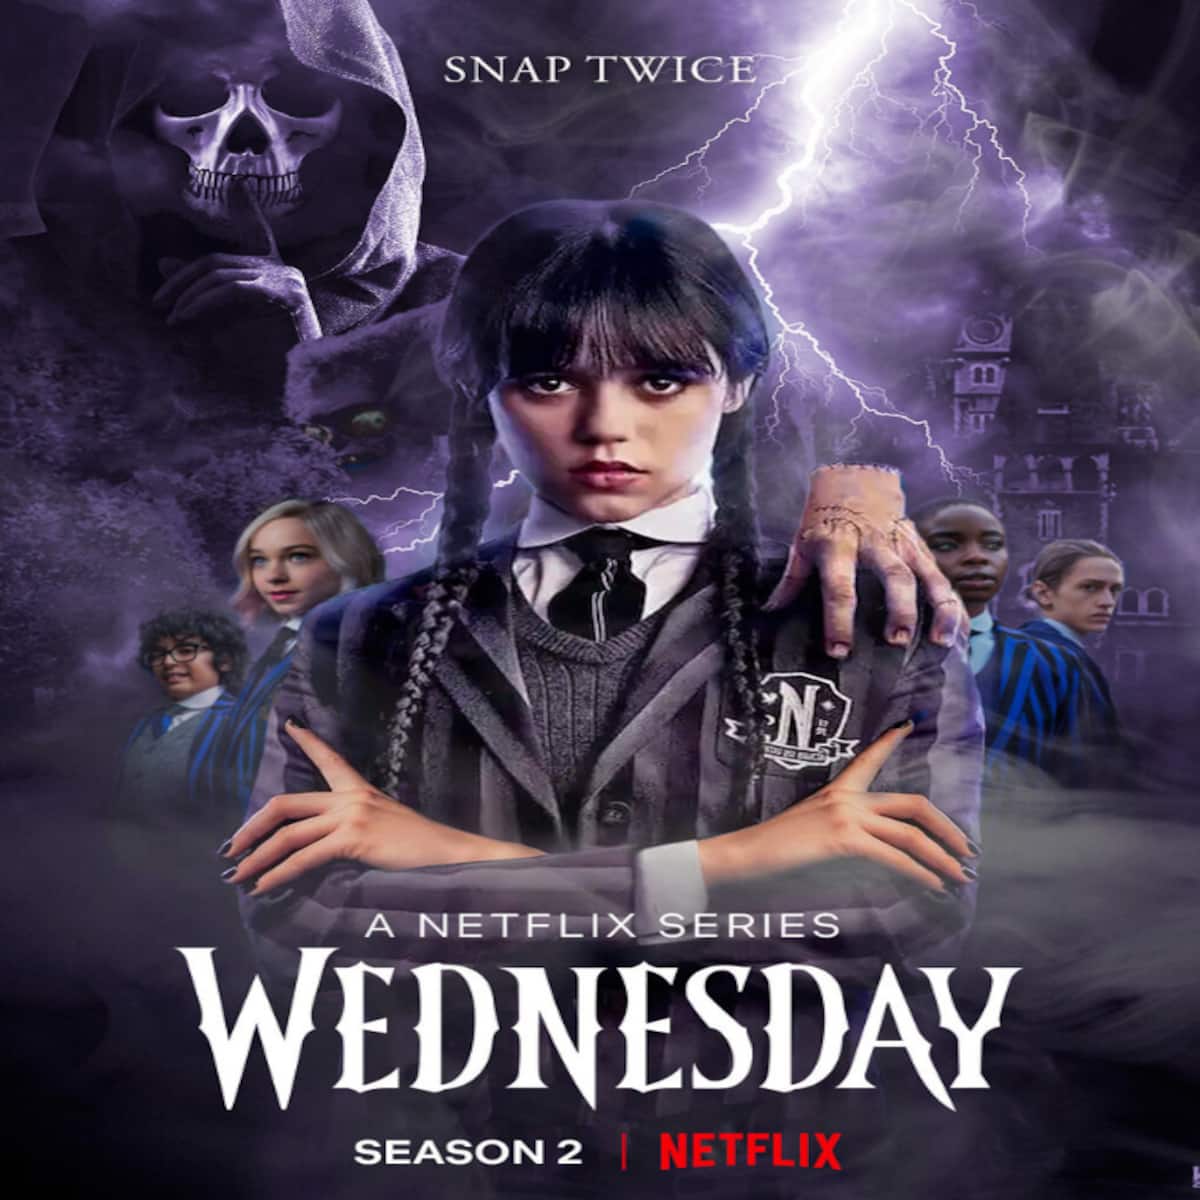 Wednesday' season 2: All you need to know about its upcoming season